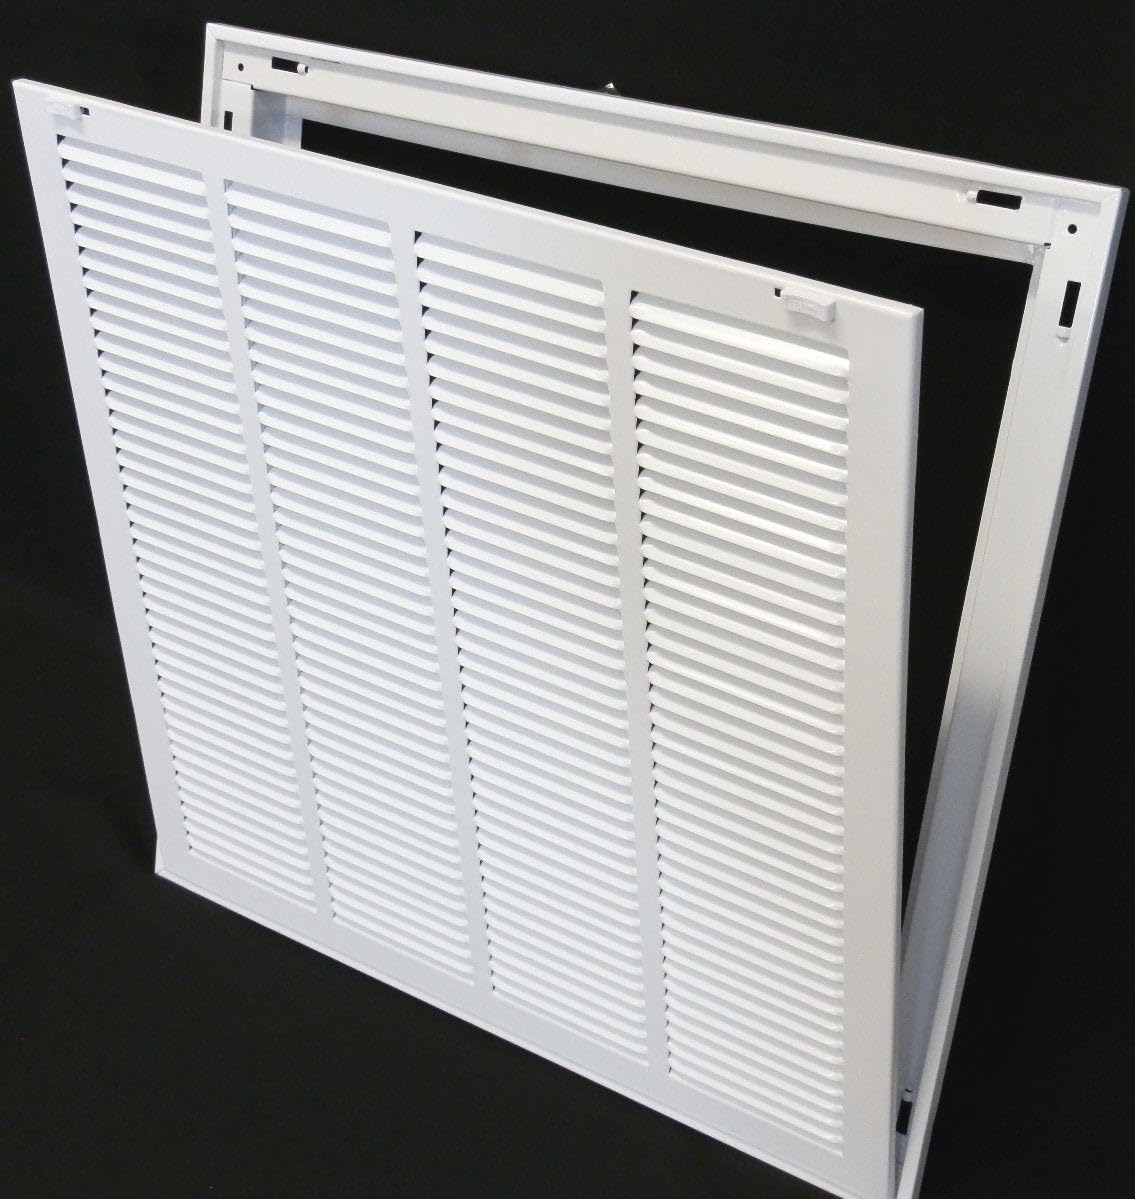 30&quot; X 14&quot; Steel Return Air Filter Grille for 1&quot; Filter - Removable Frame - * Filter Included * [Outer Dimensions: 32 5/8&quot; X 16 5/8&quot;]